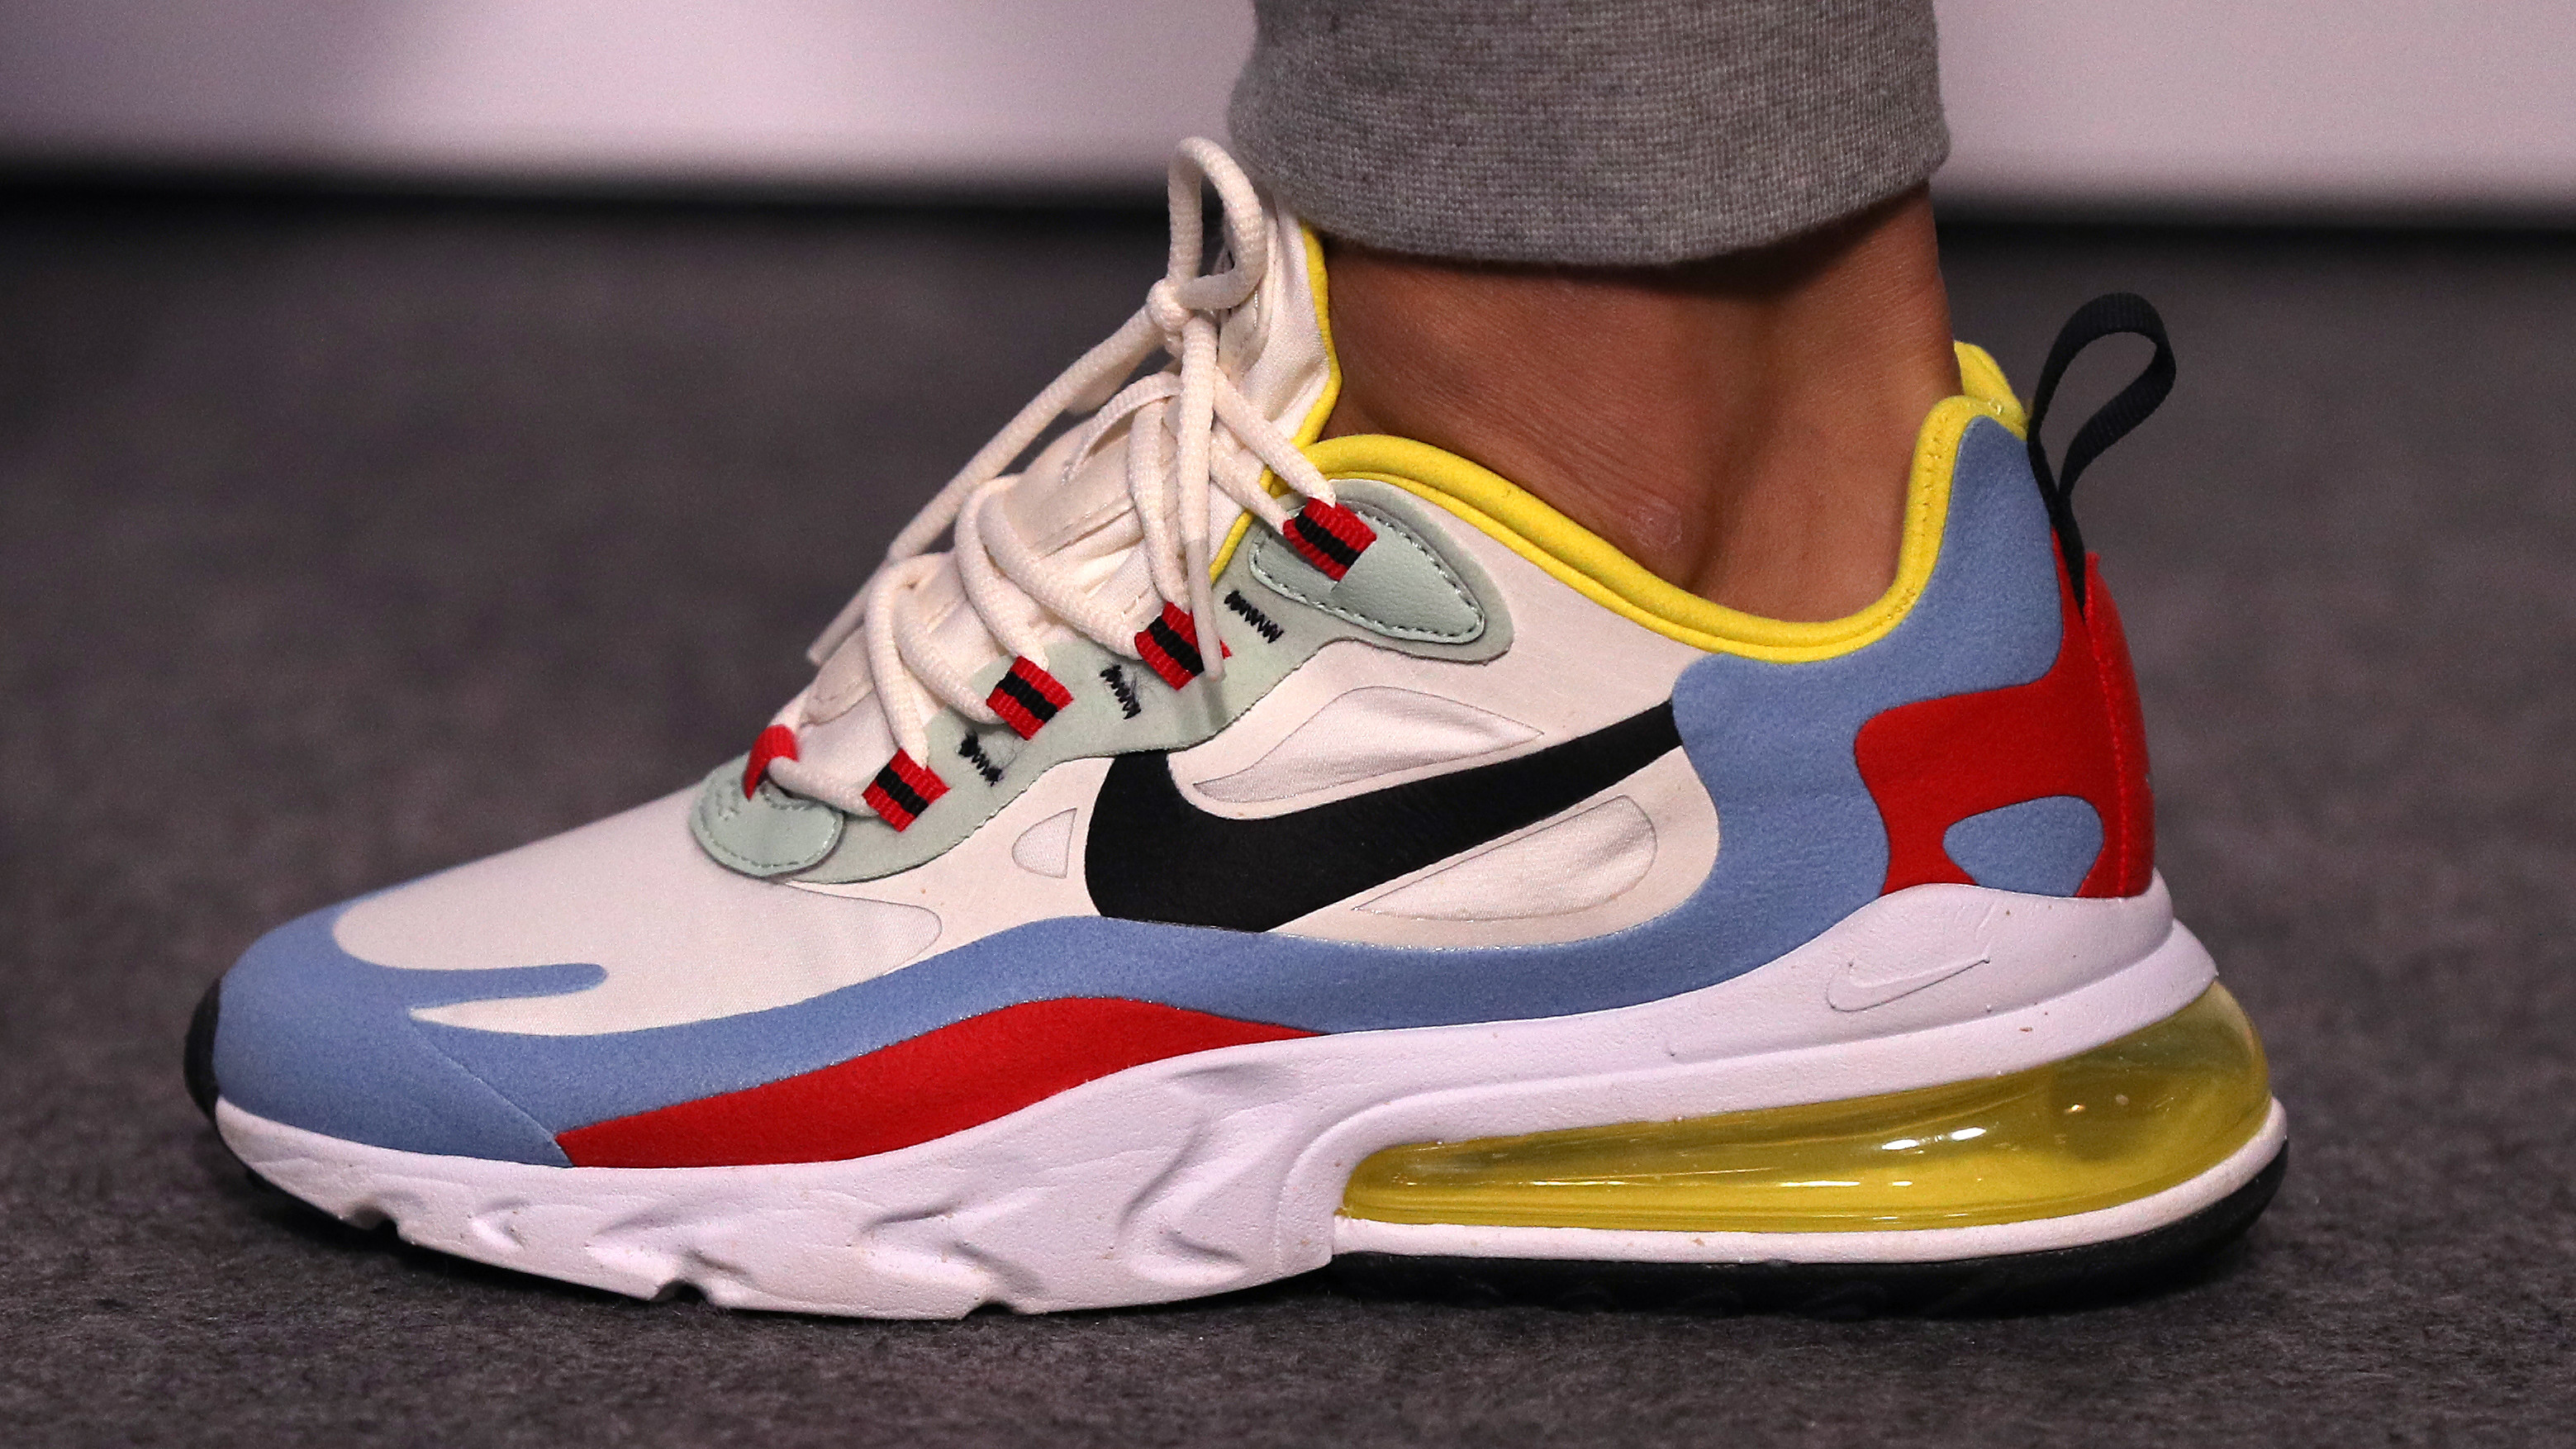 Nike Air Max 270 React Release Date | Sole Collector